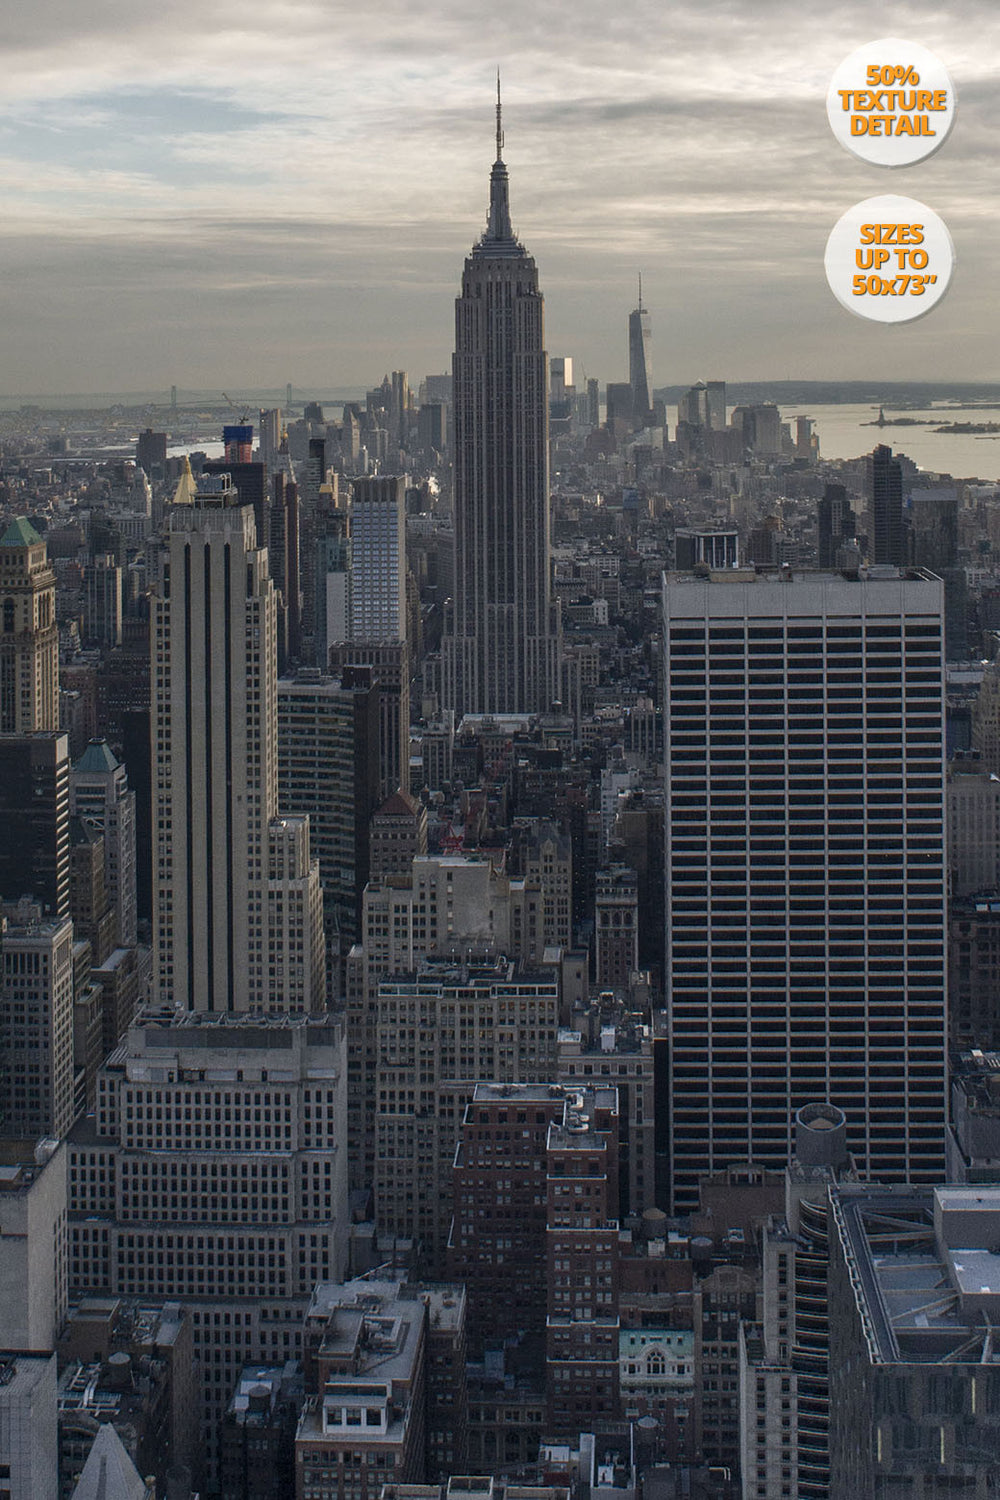 The Empire State Building before sunset, Midtown Manhattan, US. | View of the Print at 50% magnification detail.